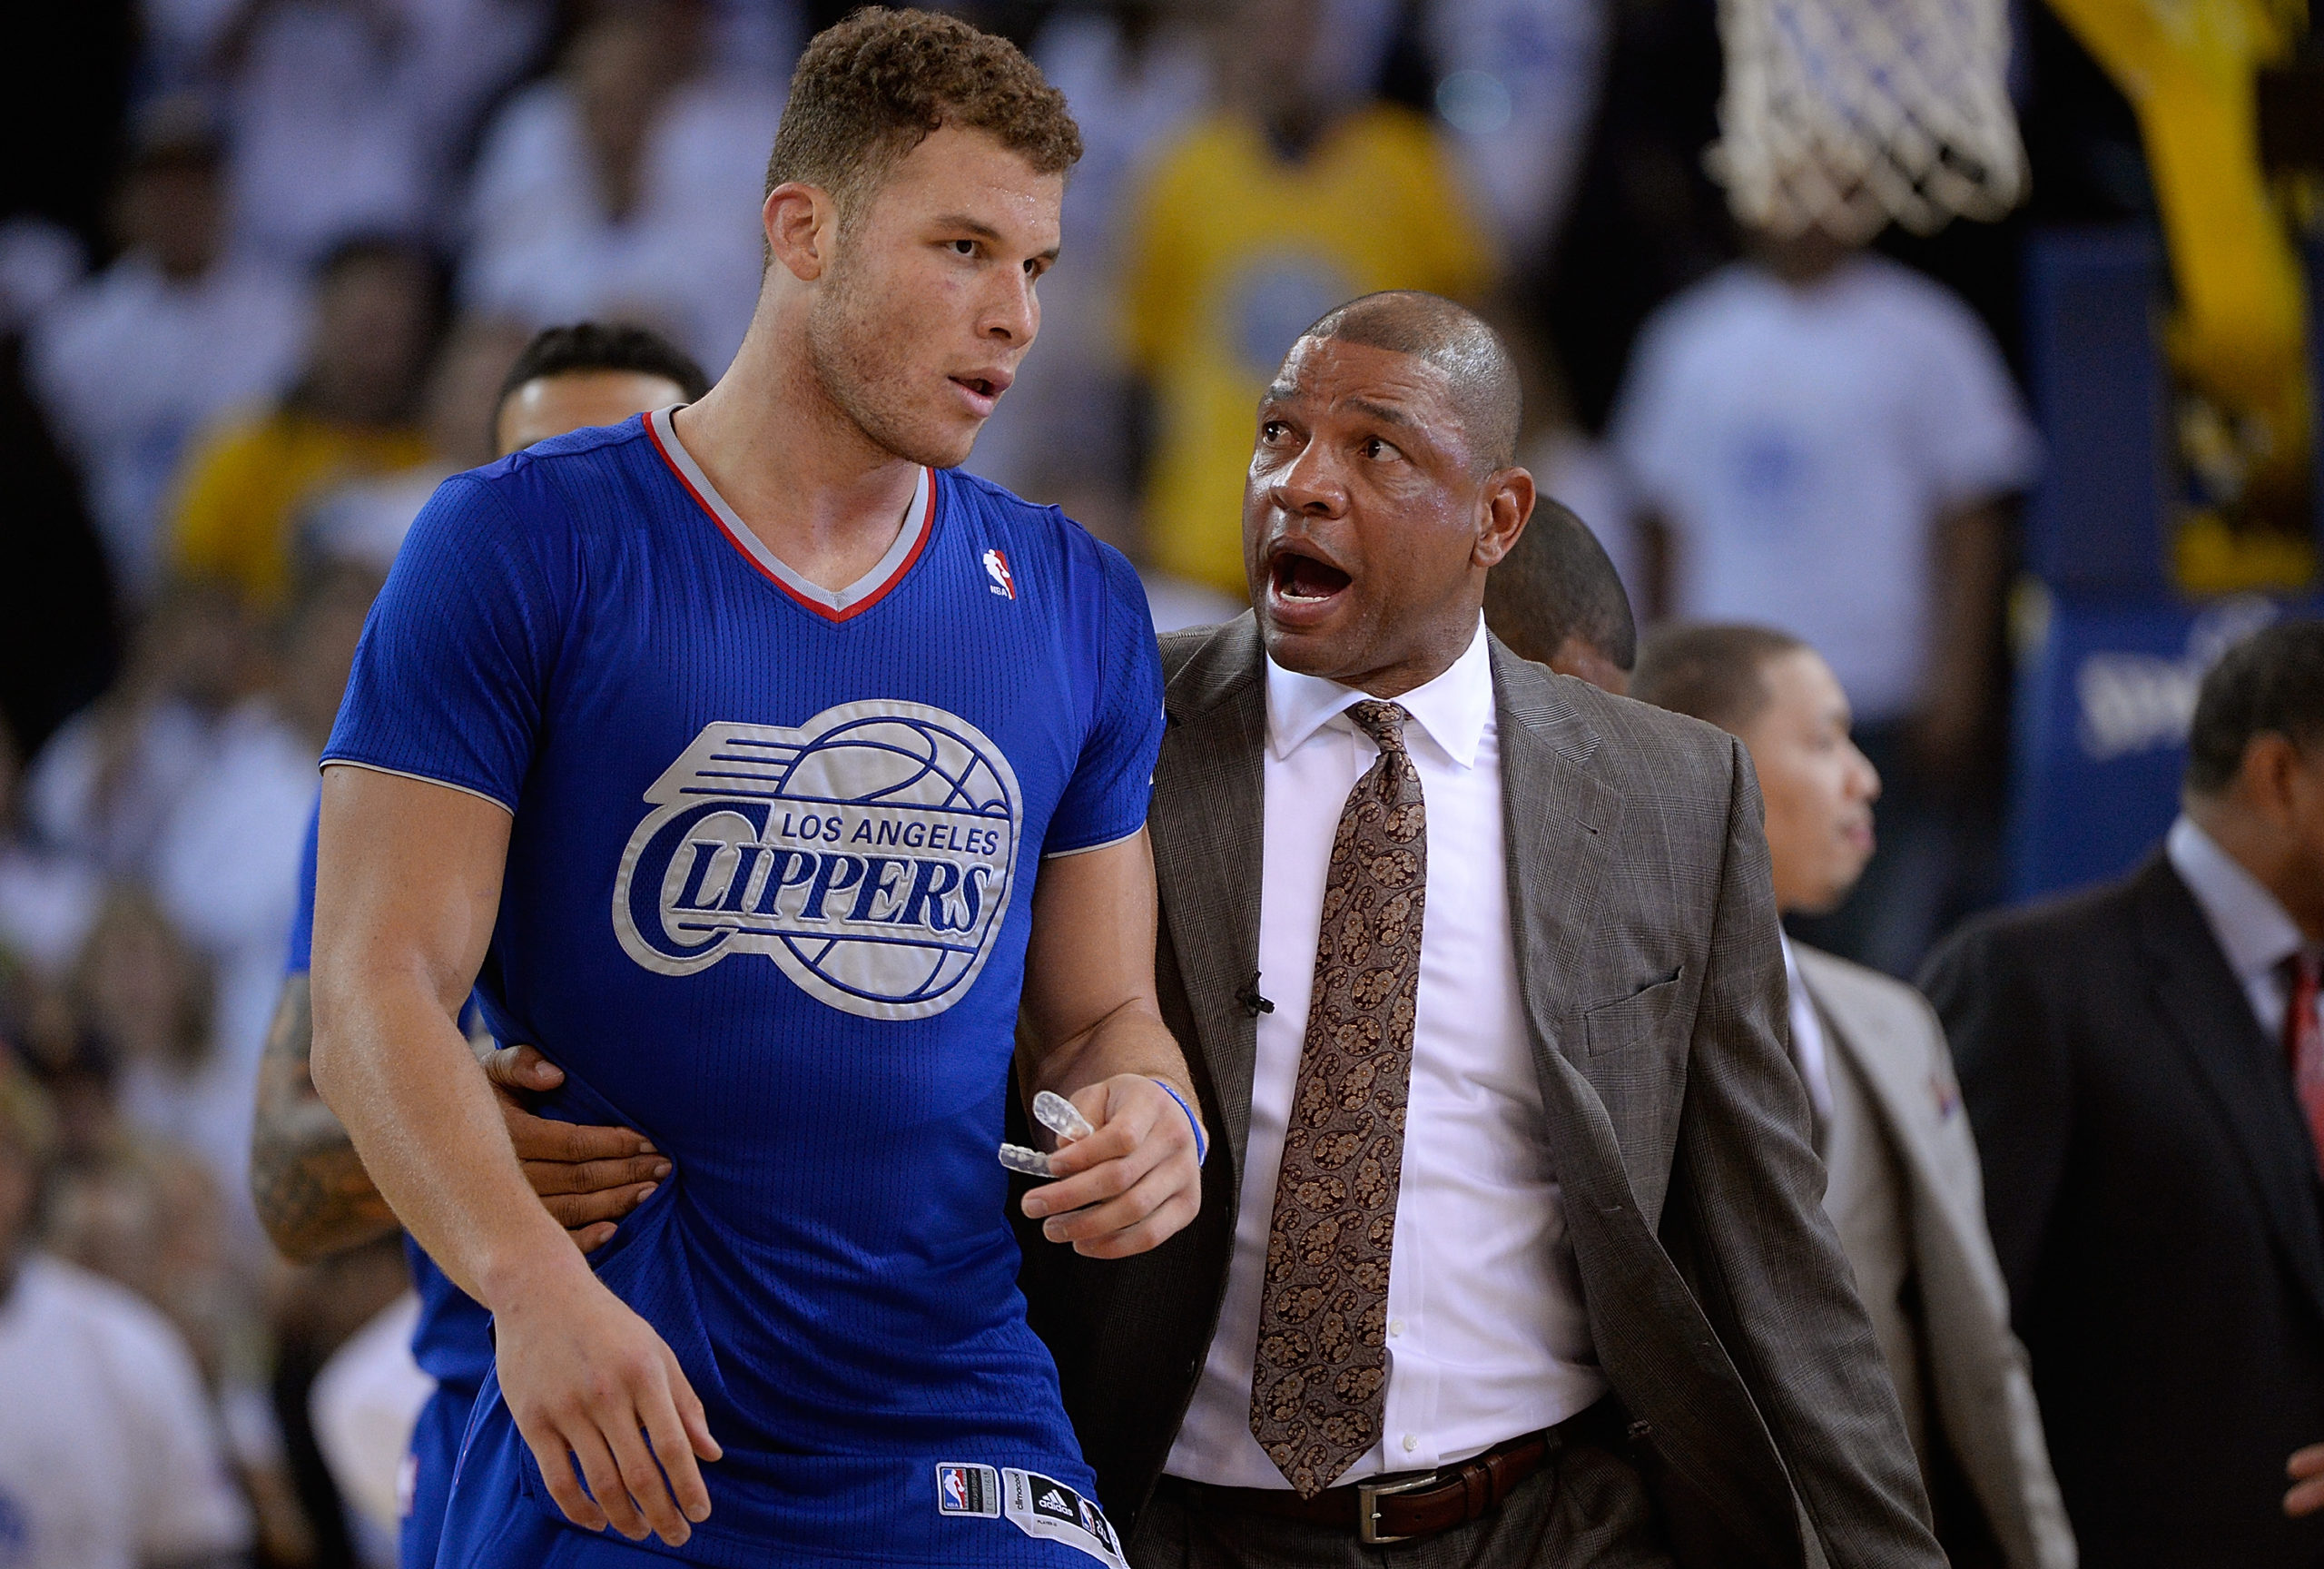 OAKLAND, CA - DECEMBER 25: Head Coach Doc Rivers of the Los Angeles Clippers comes out on the court to get Blake Griffin #32 who was ejected for his second flagrant foul against the Golden State Warriors during the fourth quarter at ORACLE Arena on December 25, 2013 in Oakland, California. Thearon W. Henderson/Getty Images